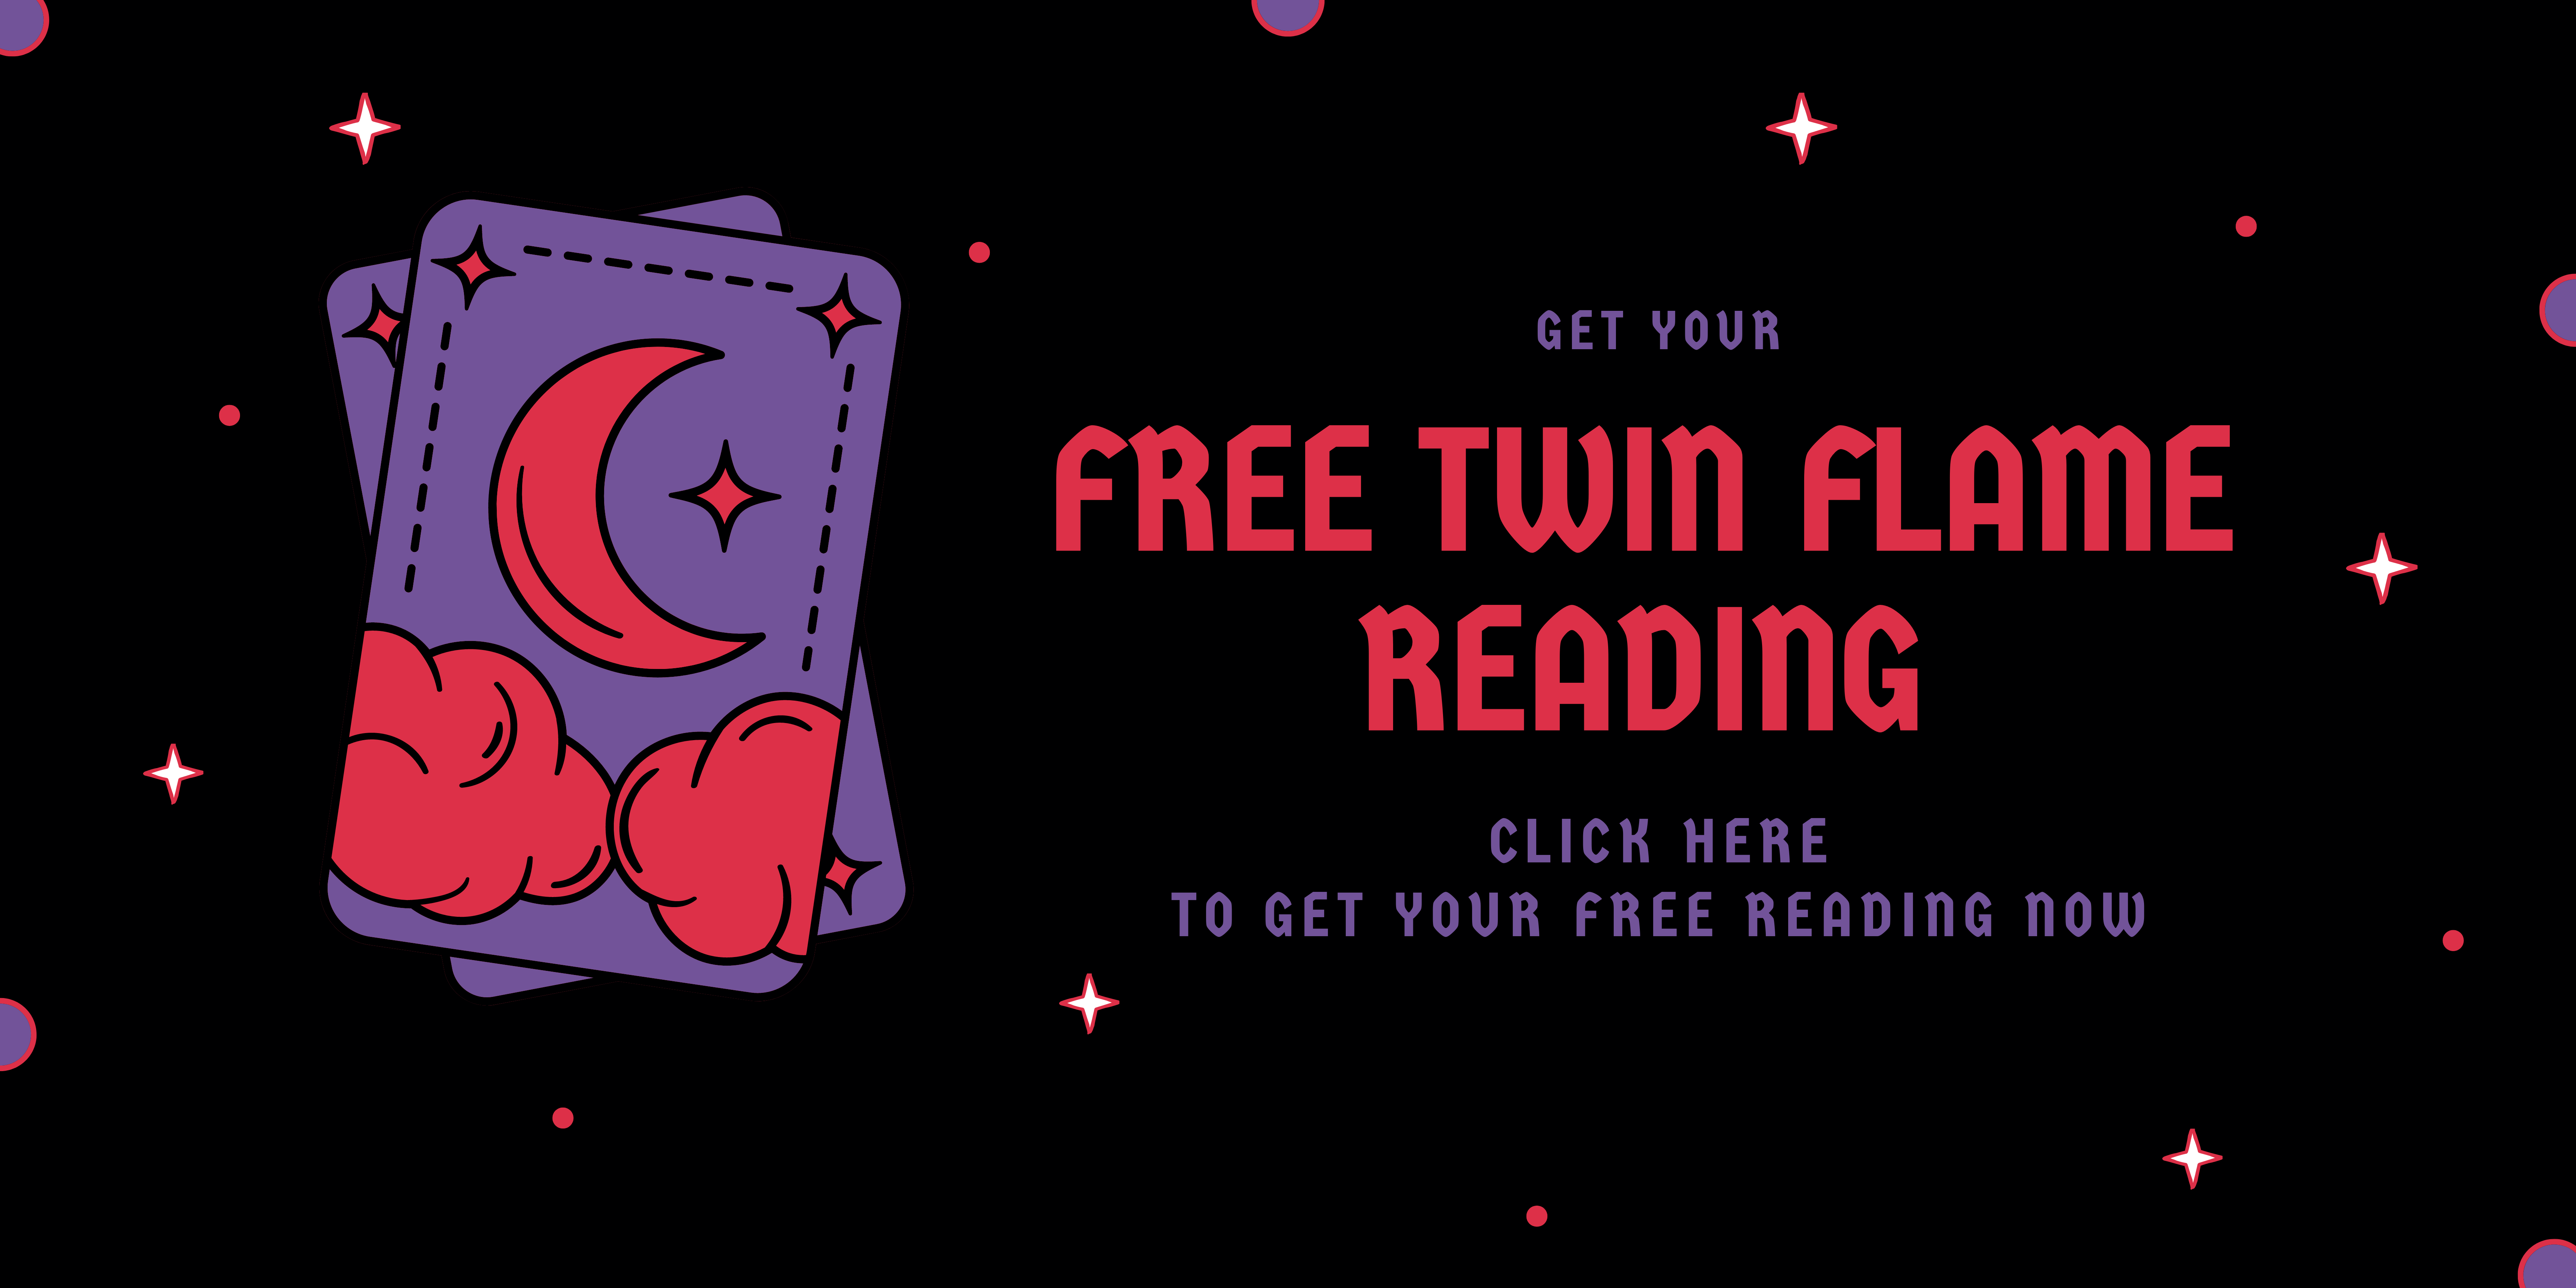 Find your new Free Twin Flame Reading on this page.